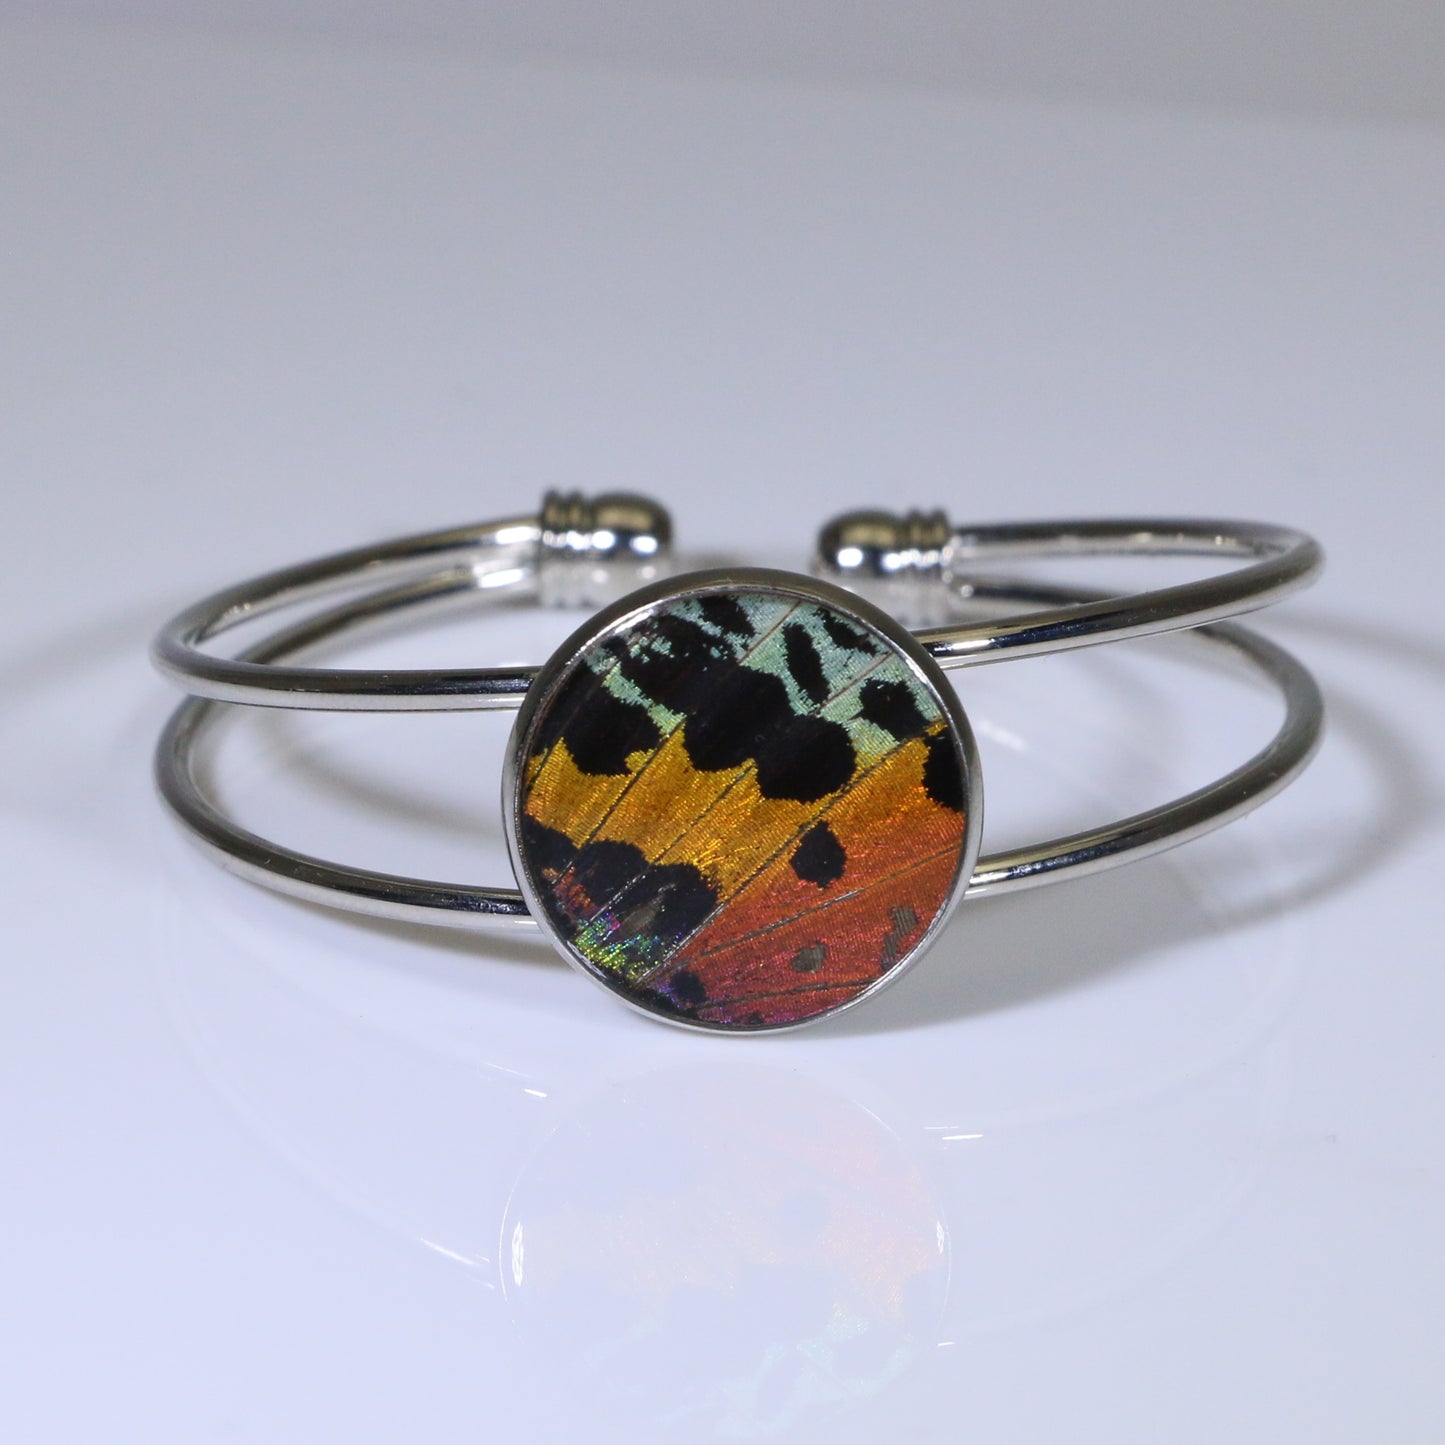 53802 - Real Butterfly Wing Jewelry - Cuff Bracelet - Silver-Plated - 20mm - Sunset Moth - Orange